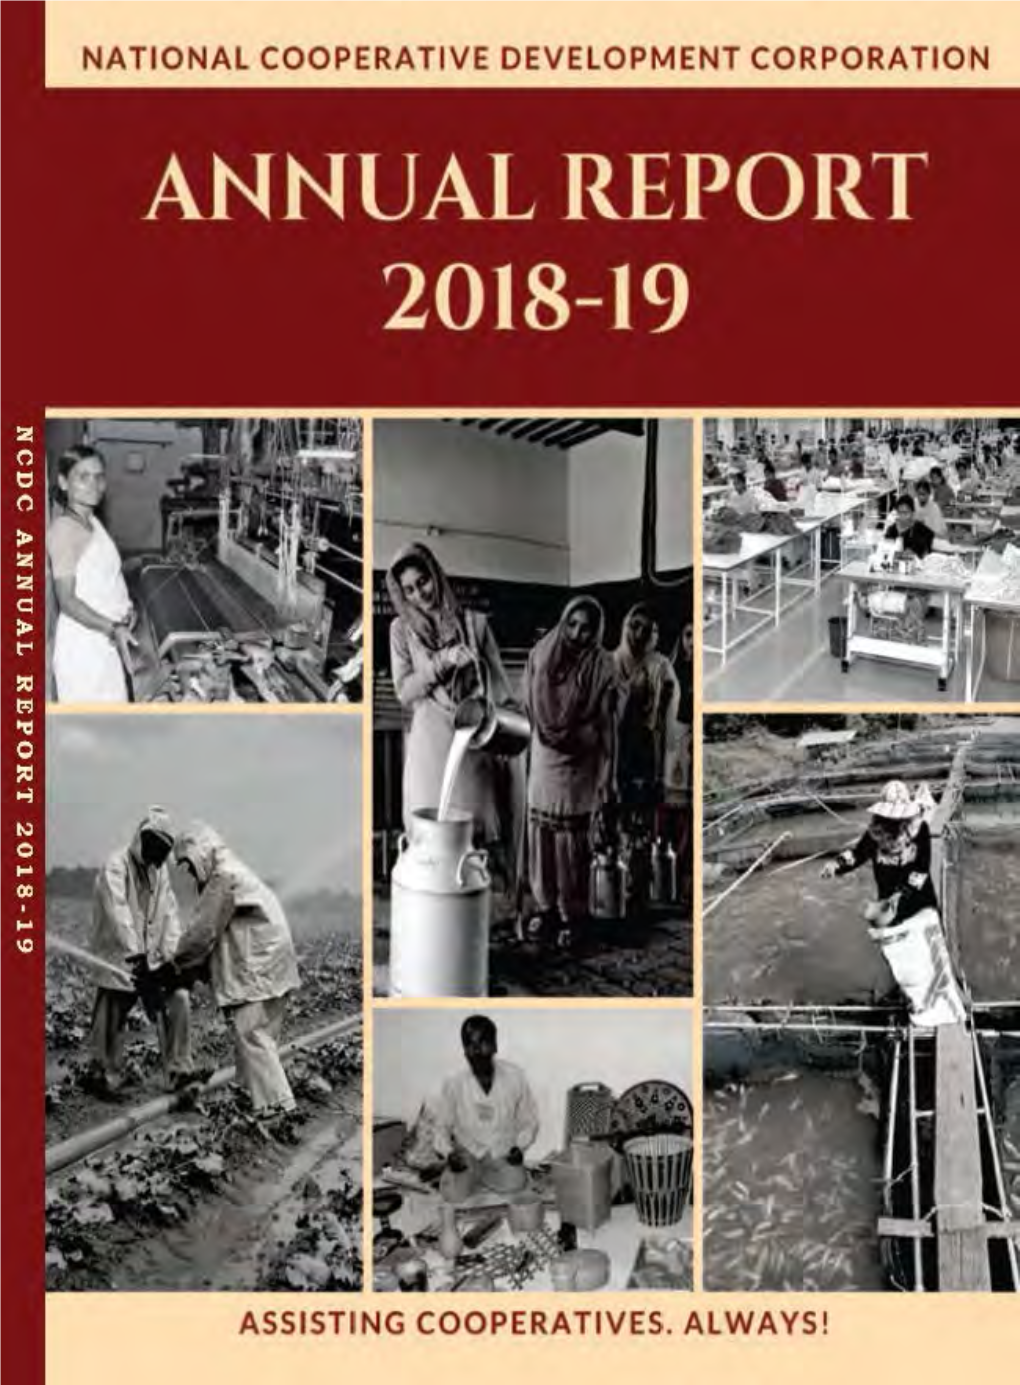 ANNUAL REPORT 2018-19 (As Required Under Section 14 (2) of the N CDC Act, 1962 Read with Rule 14 (B) of the NCDC Rules, 1975 As Amended)